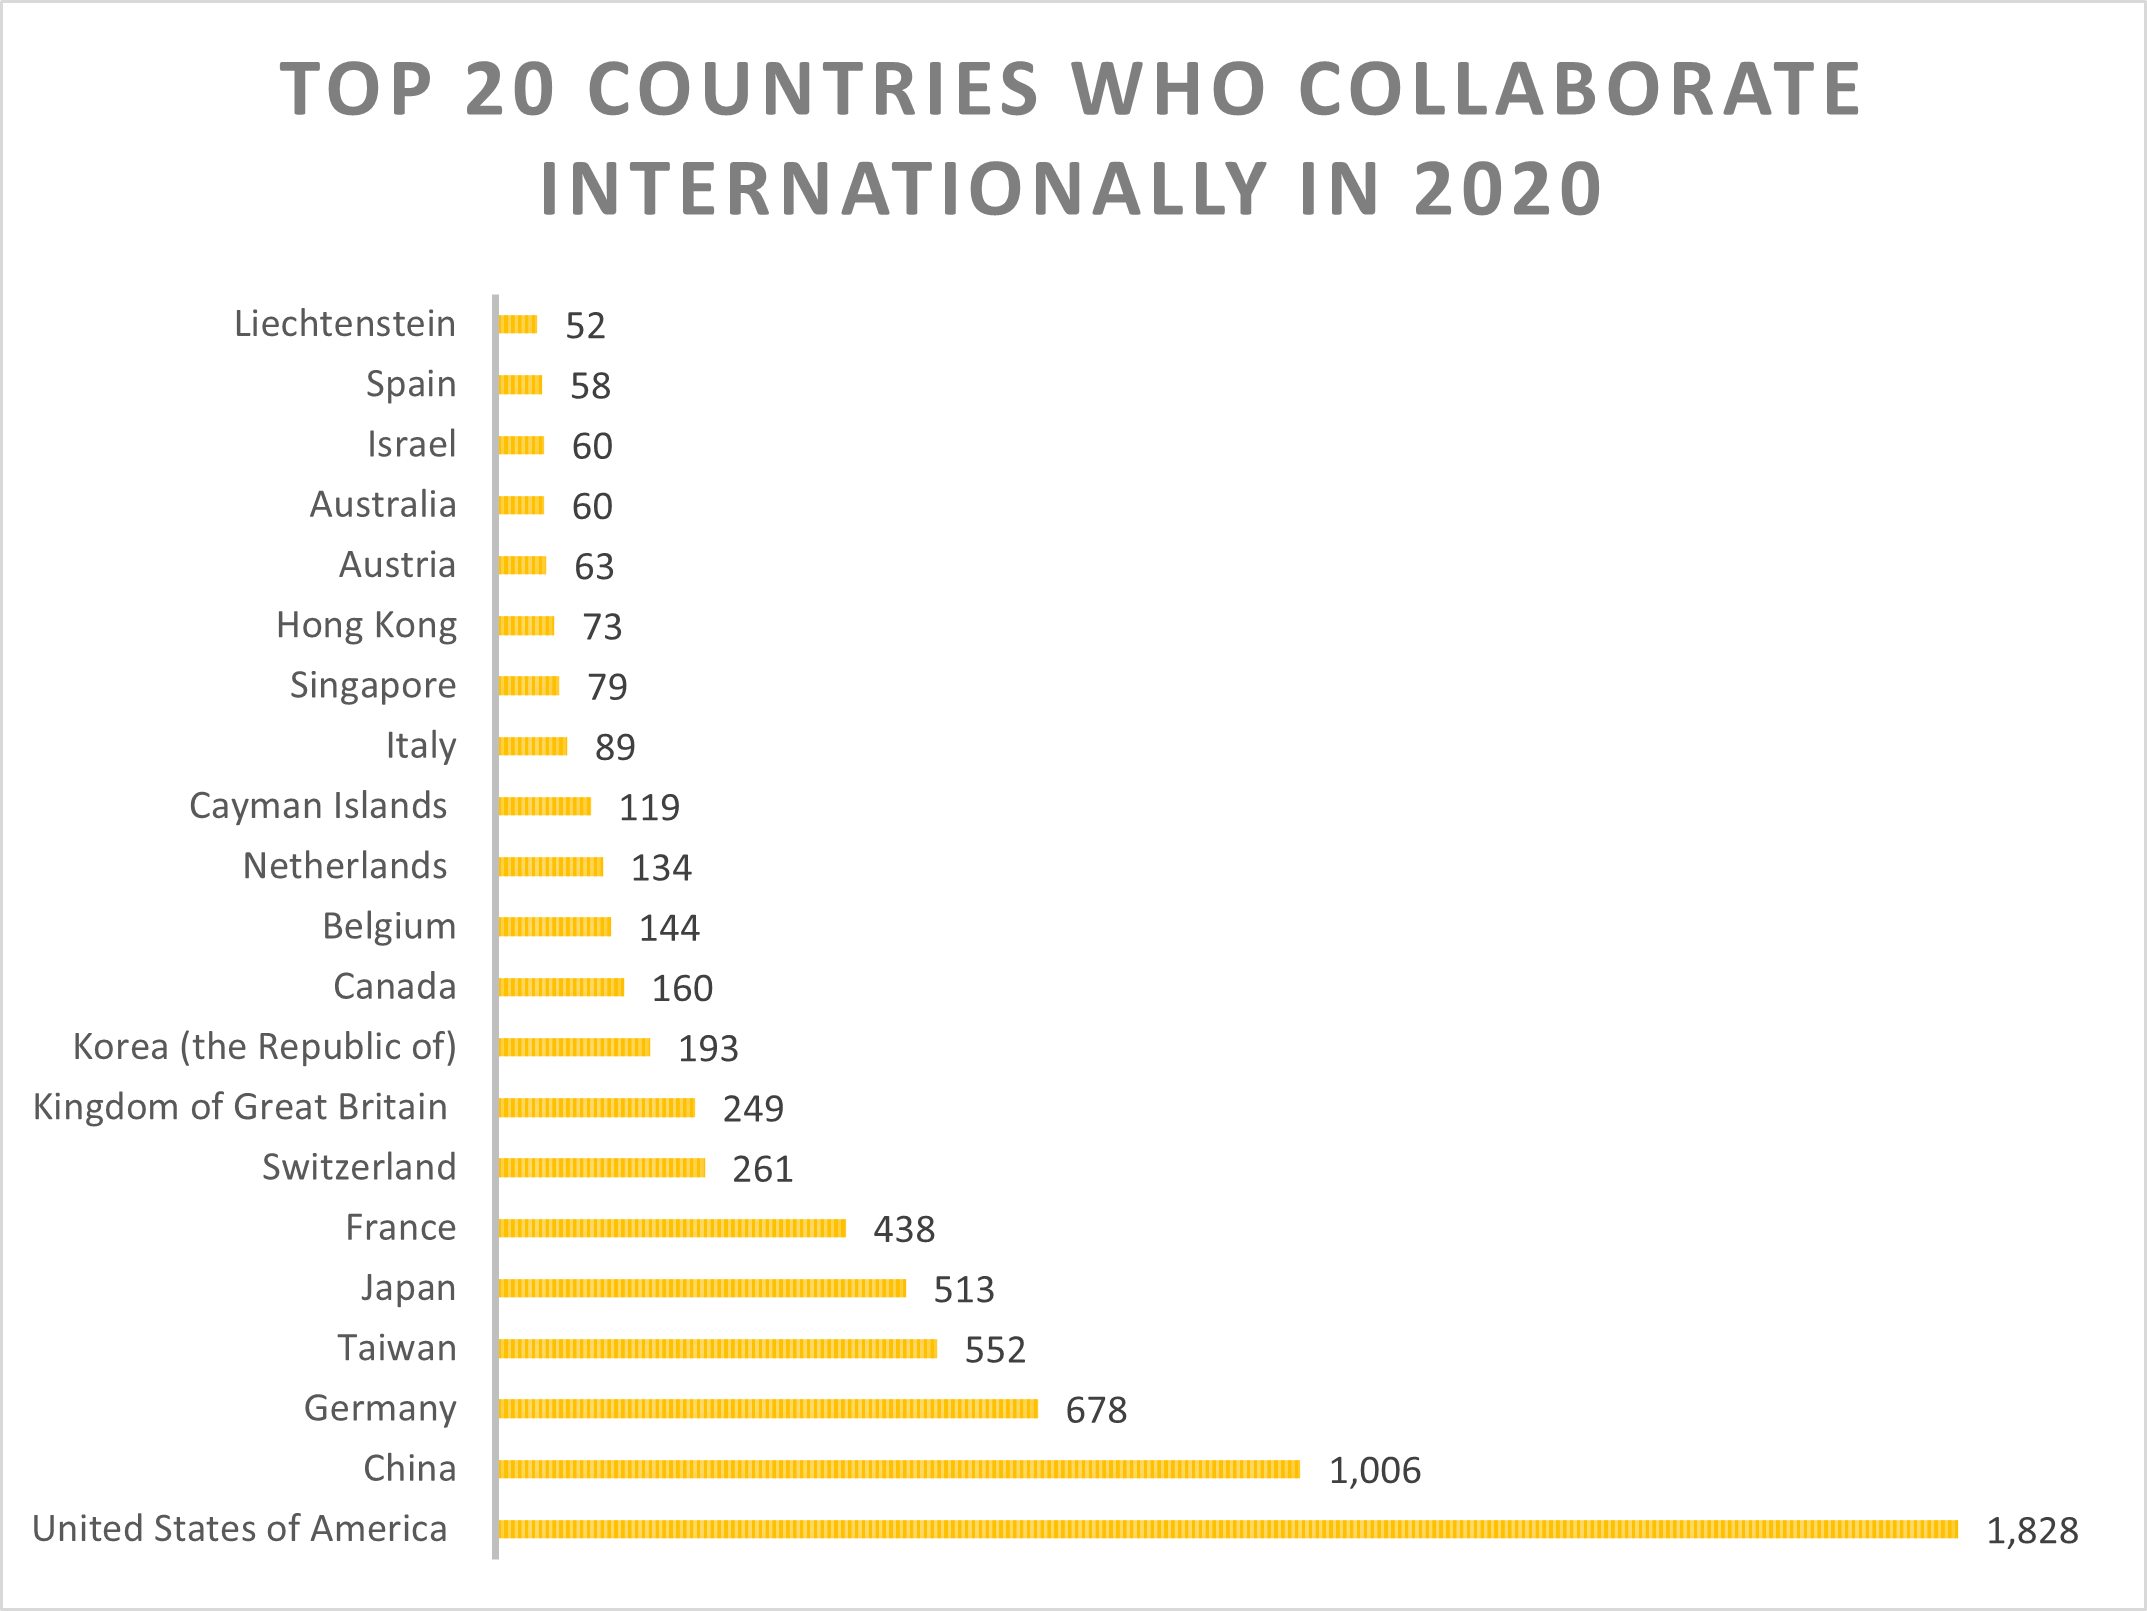 bar graph listing the top 20 countries who collaborate internationally in the year 2020